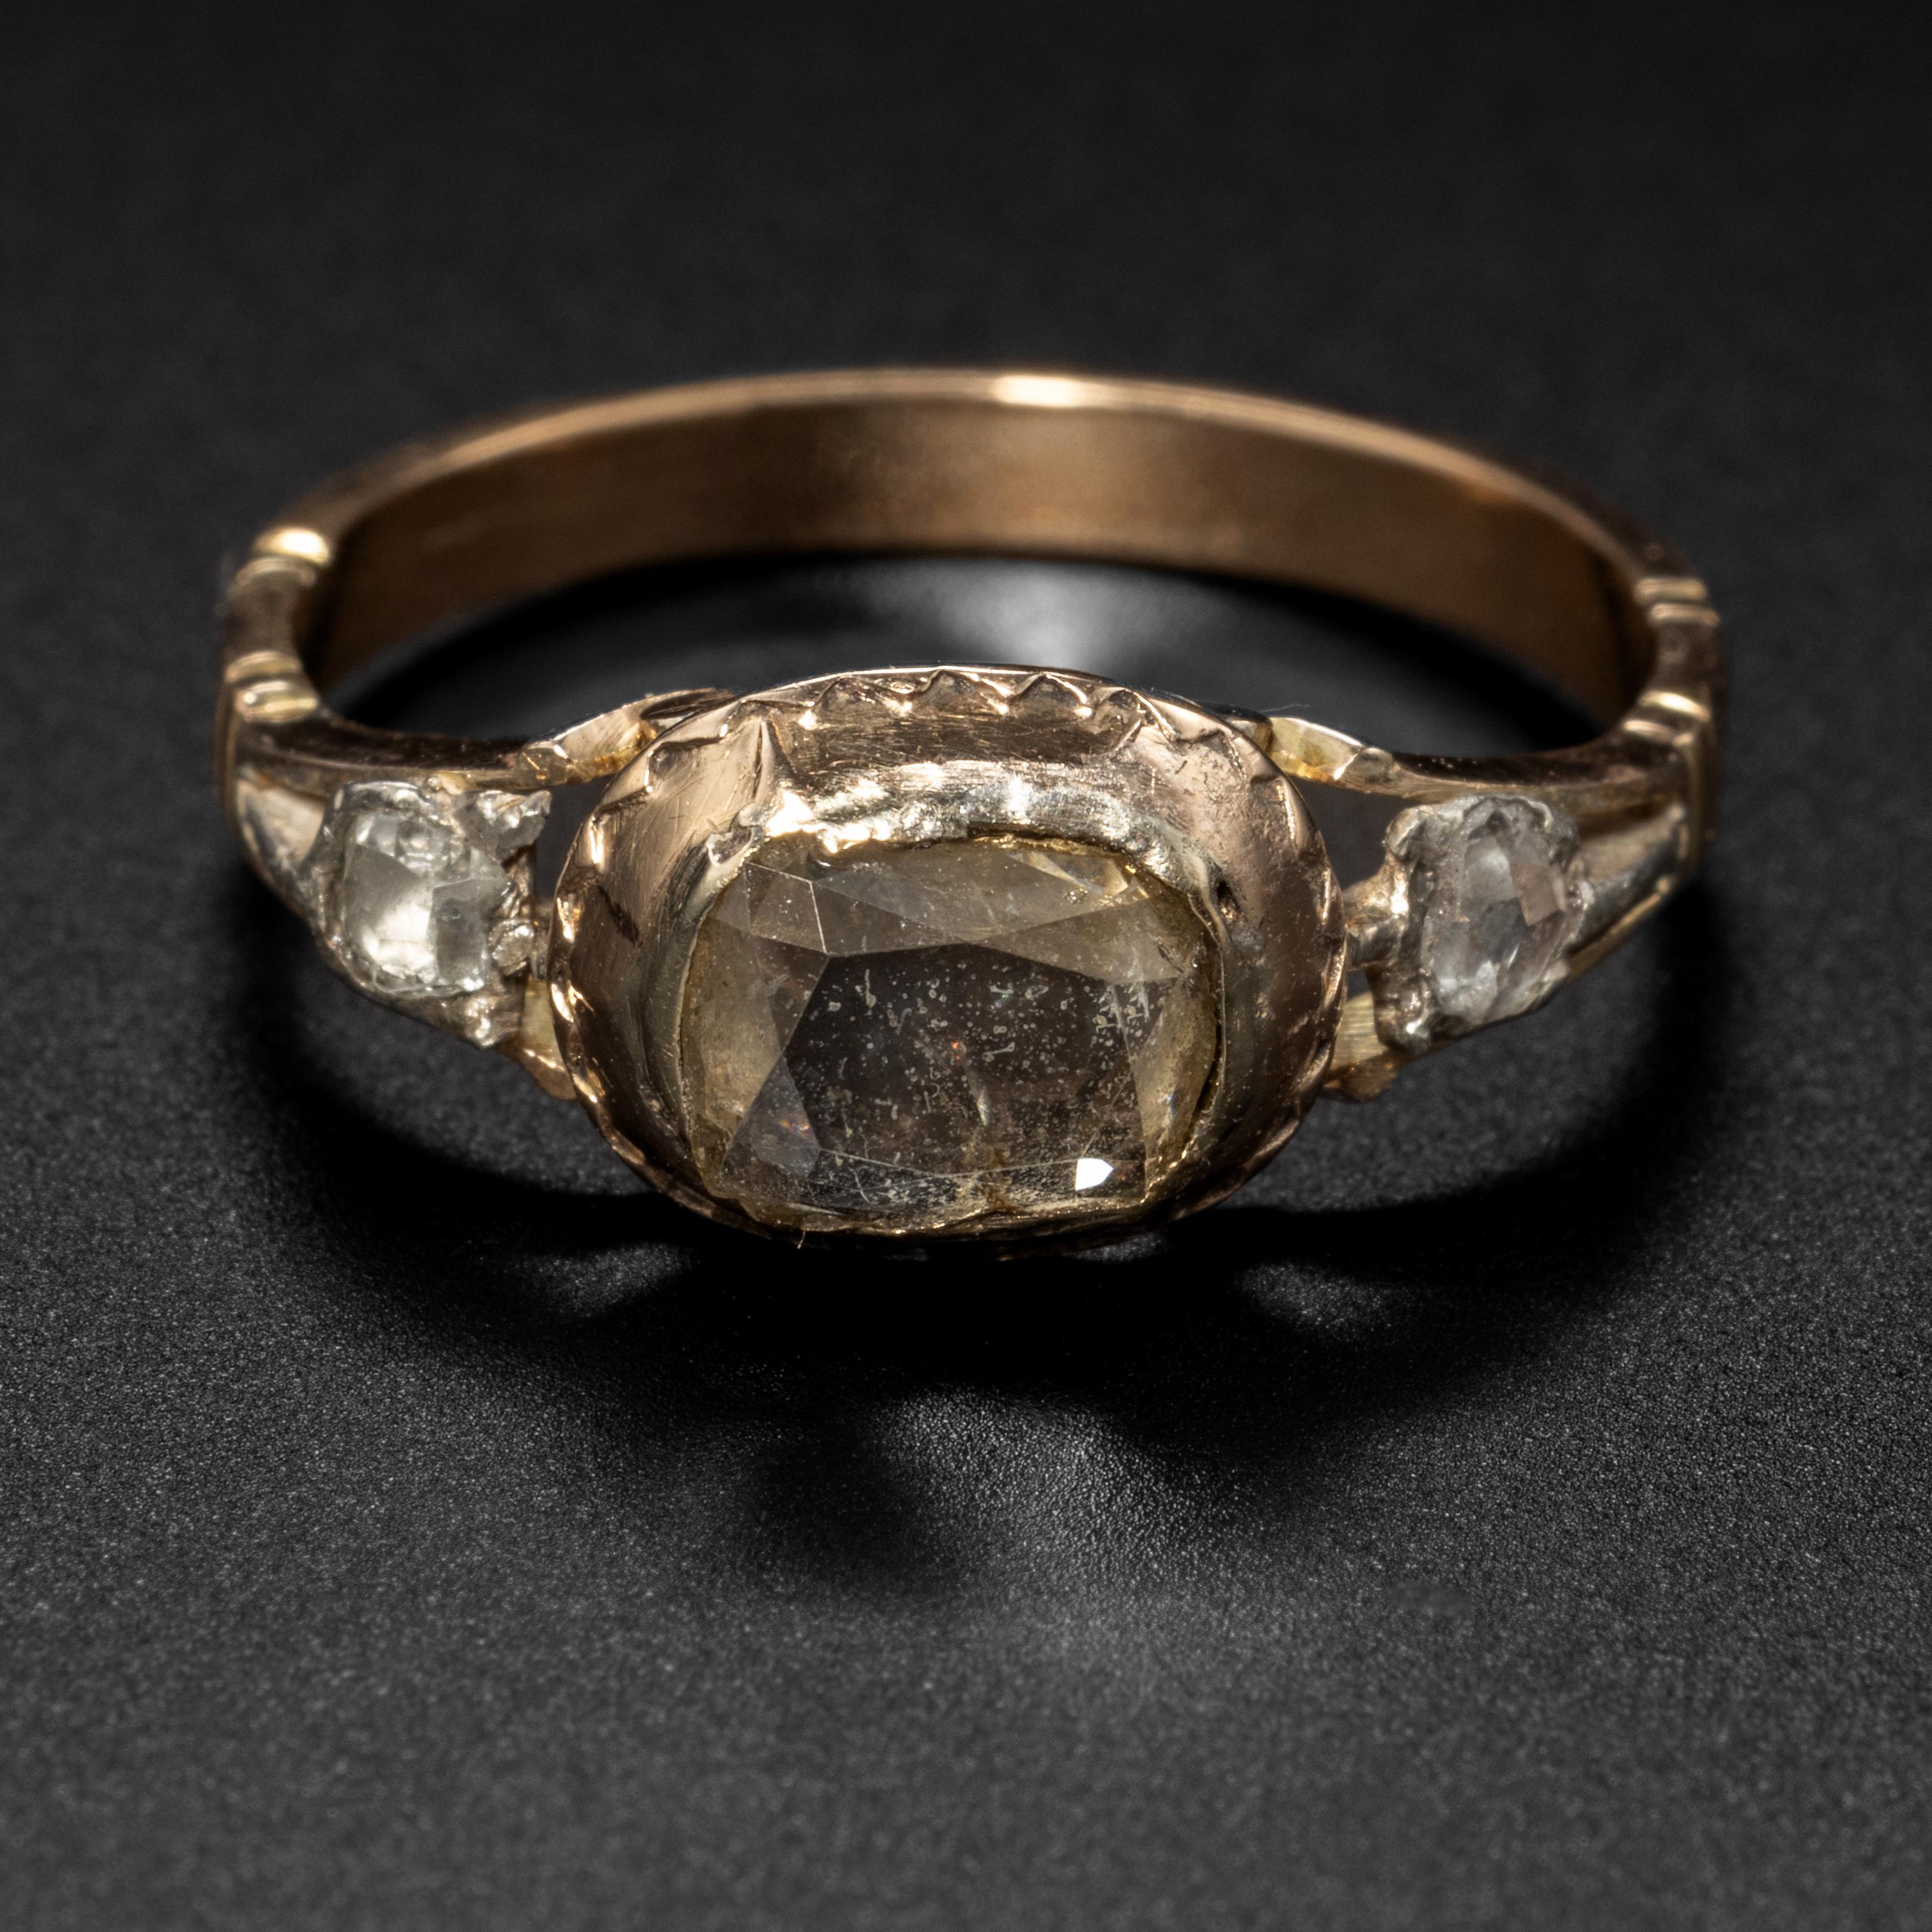 This Georgian-era 14K gold and silver ring features a sizeable -and quite rare- table cut diamond. The closed-back setting prevents an accurate measurement of the stone but it appears to be at least 1 carat. Two and rocky little rose-cut diamonds